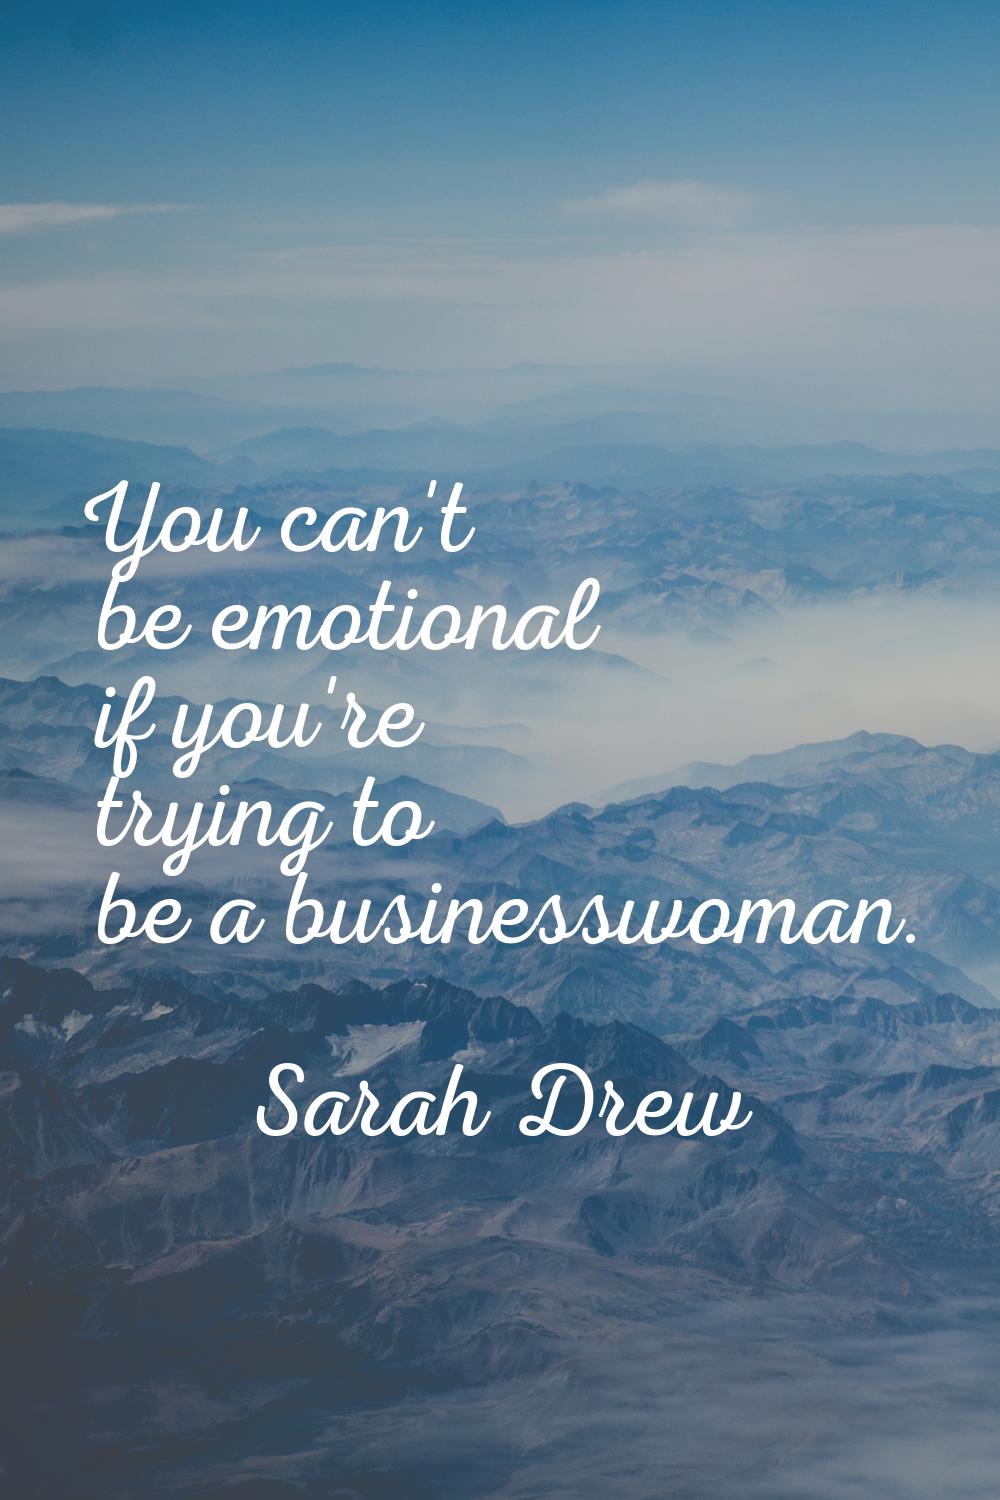 You can't be emotional if you're trying to be a businesswoman.